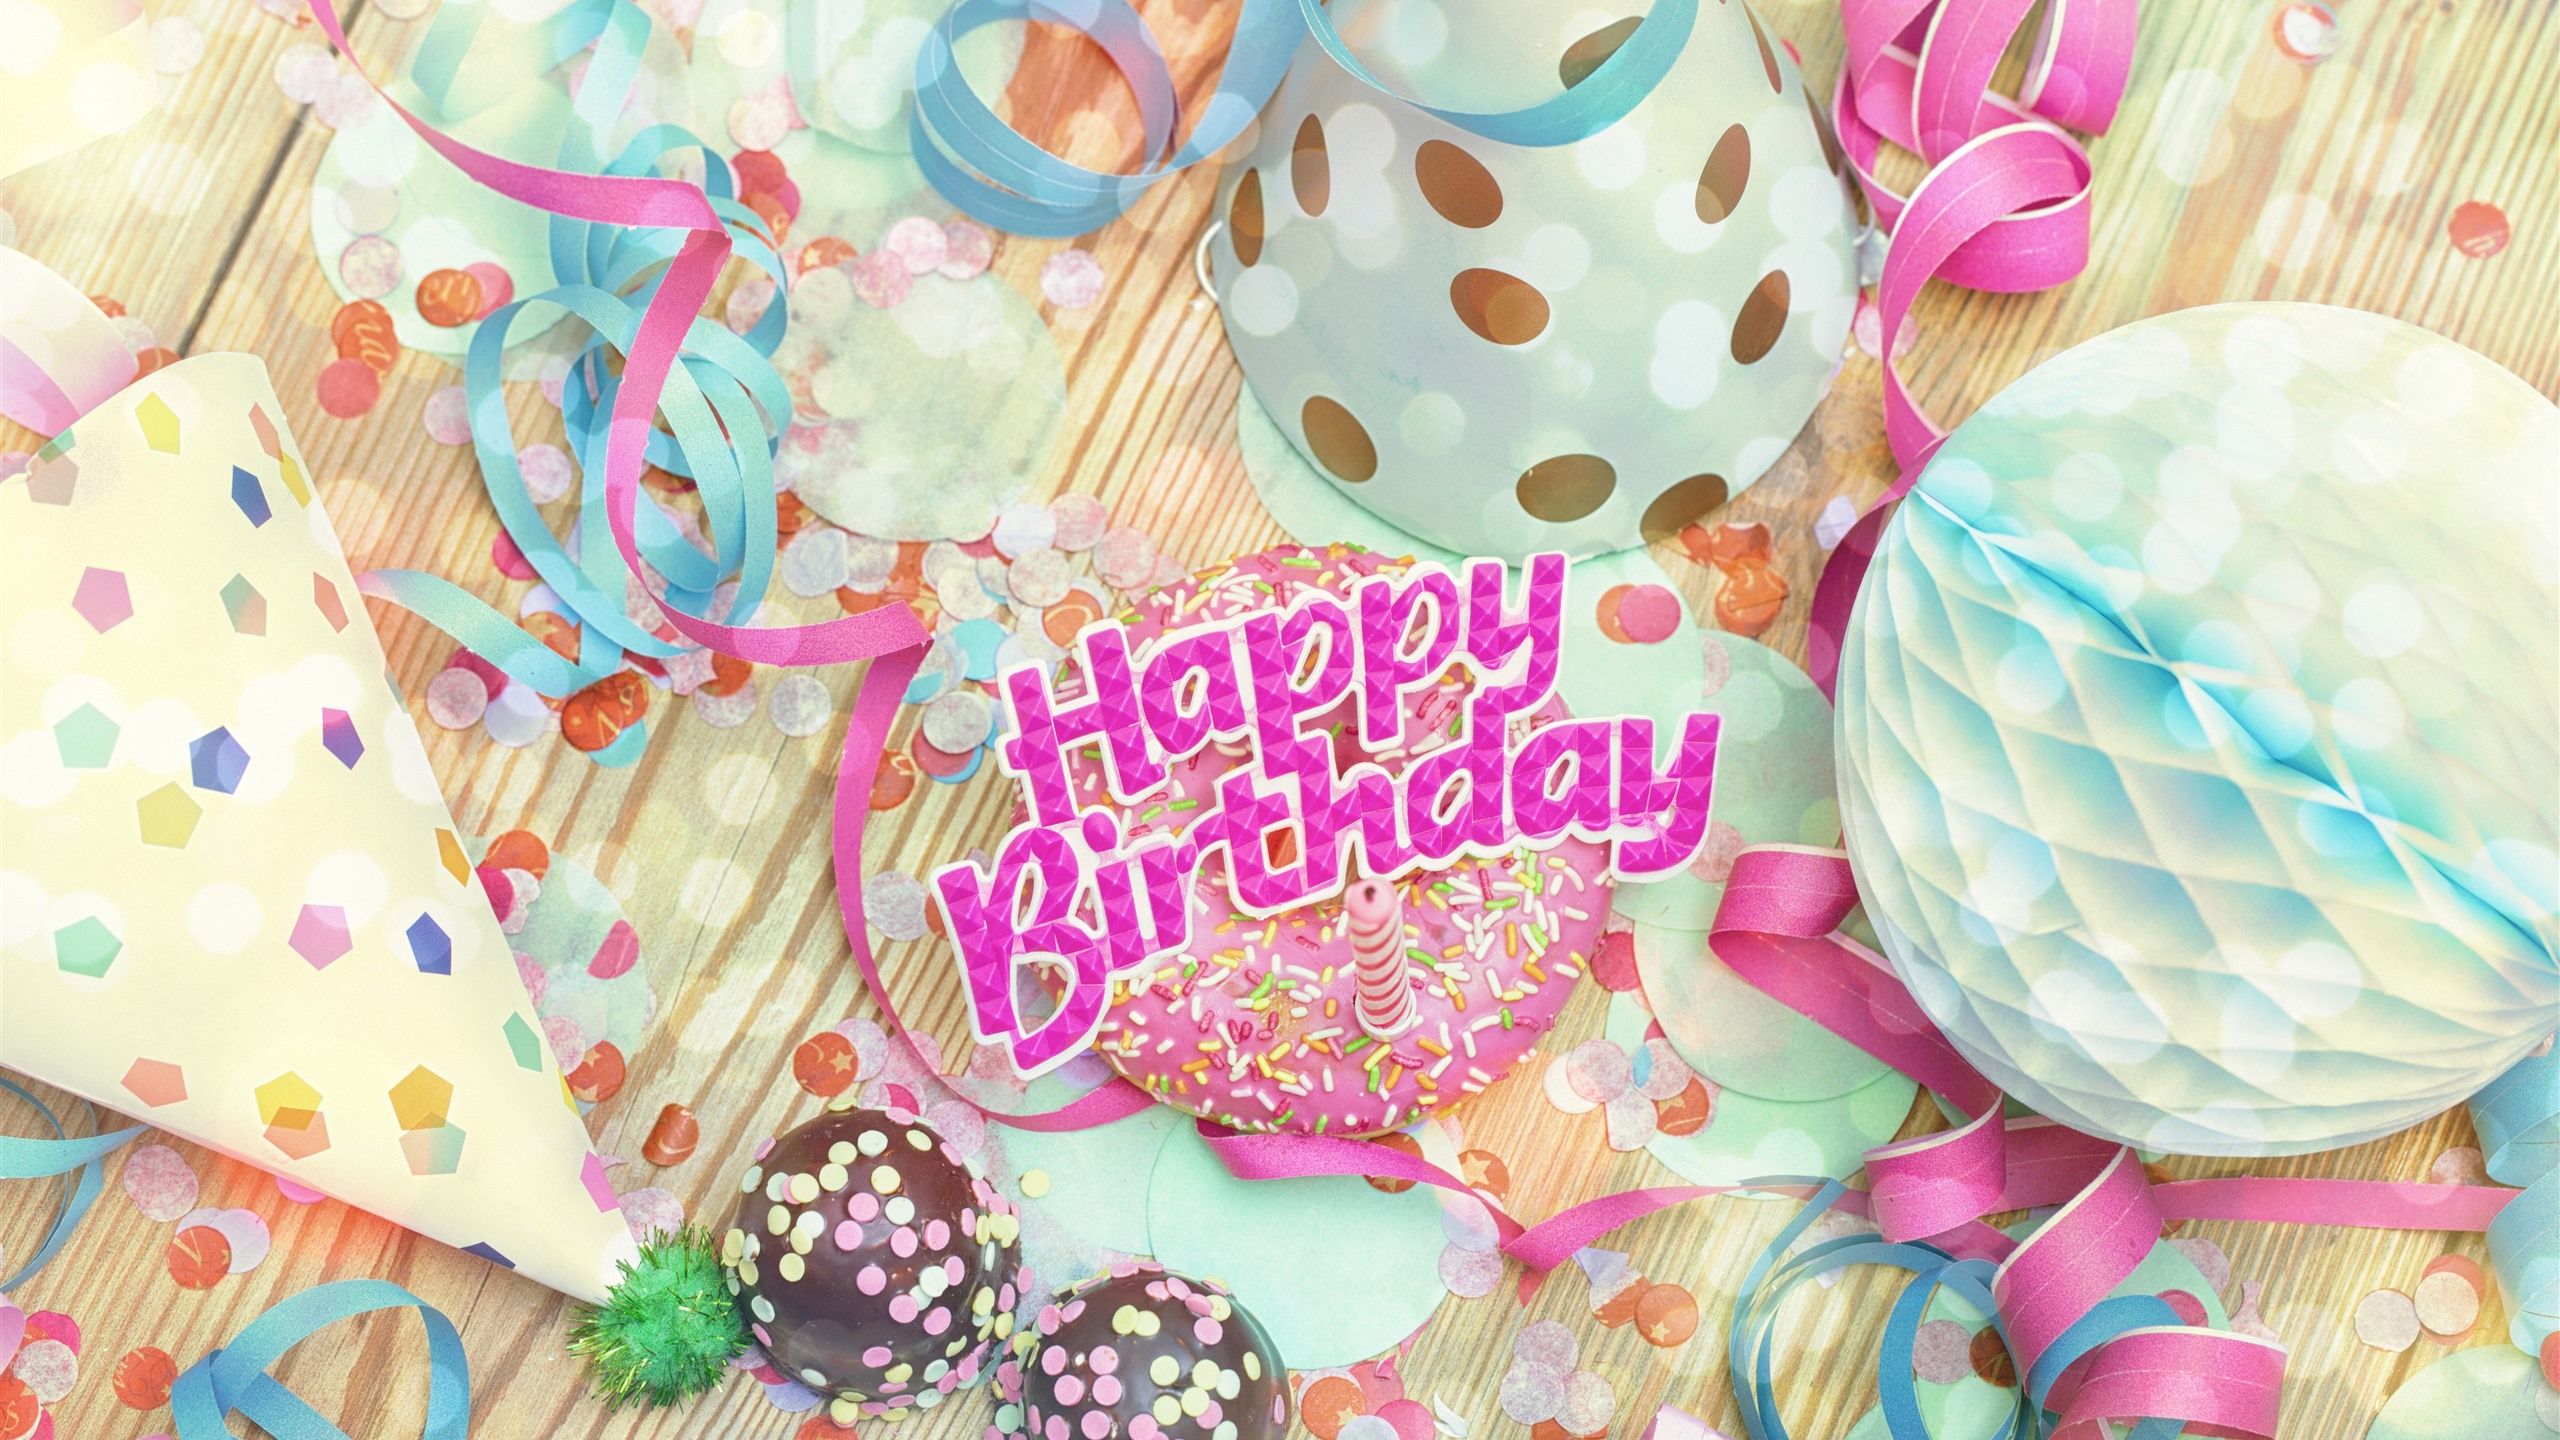 Wallpaper Happy Birthday, decoration, hat, ribbons, chocolate ball 5120x2880 UHD 5K Picture, Image